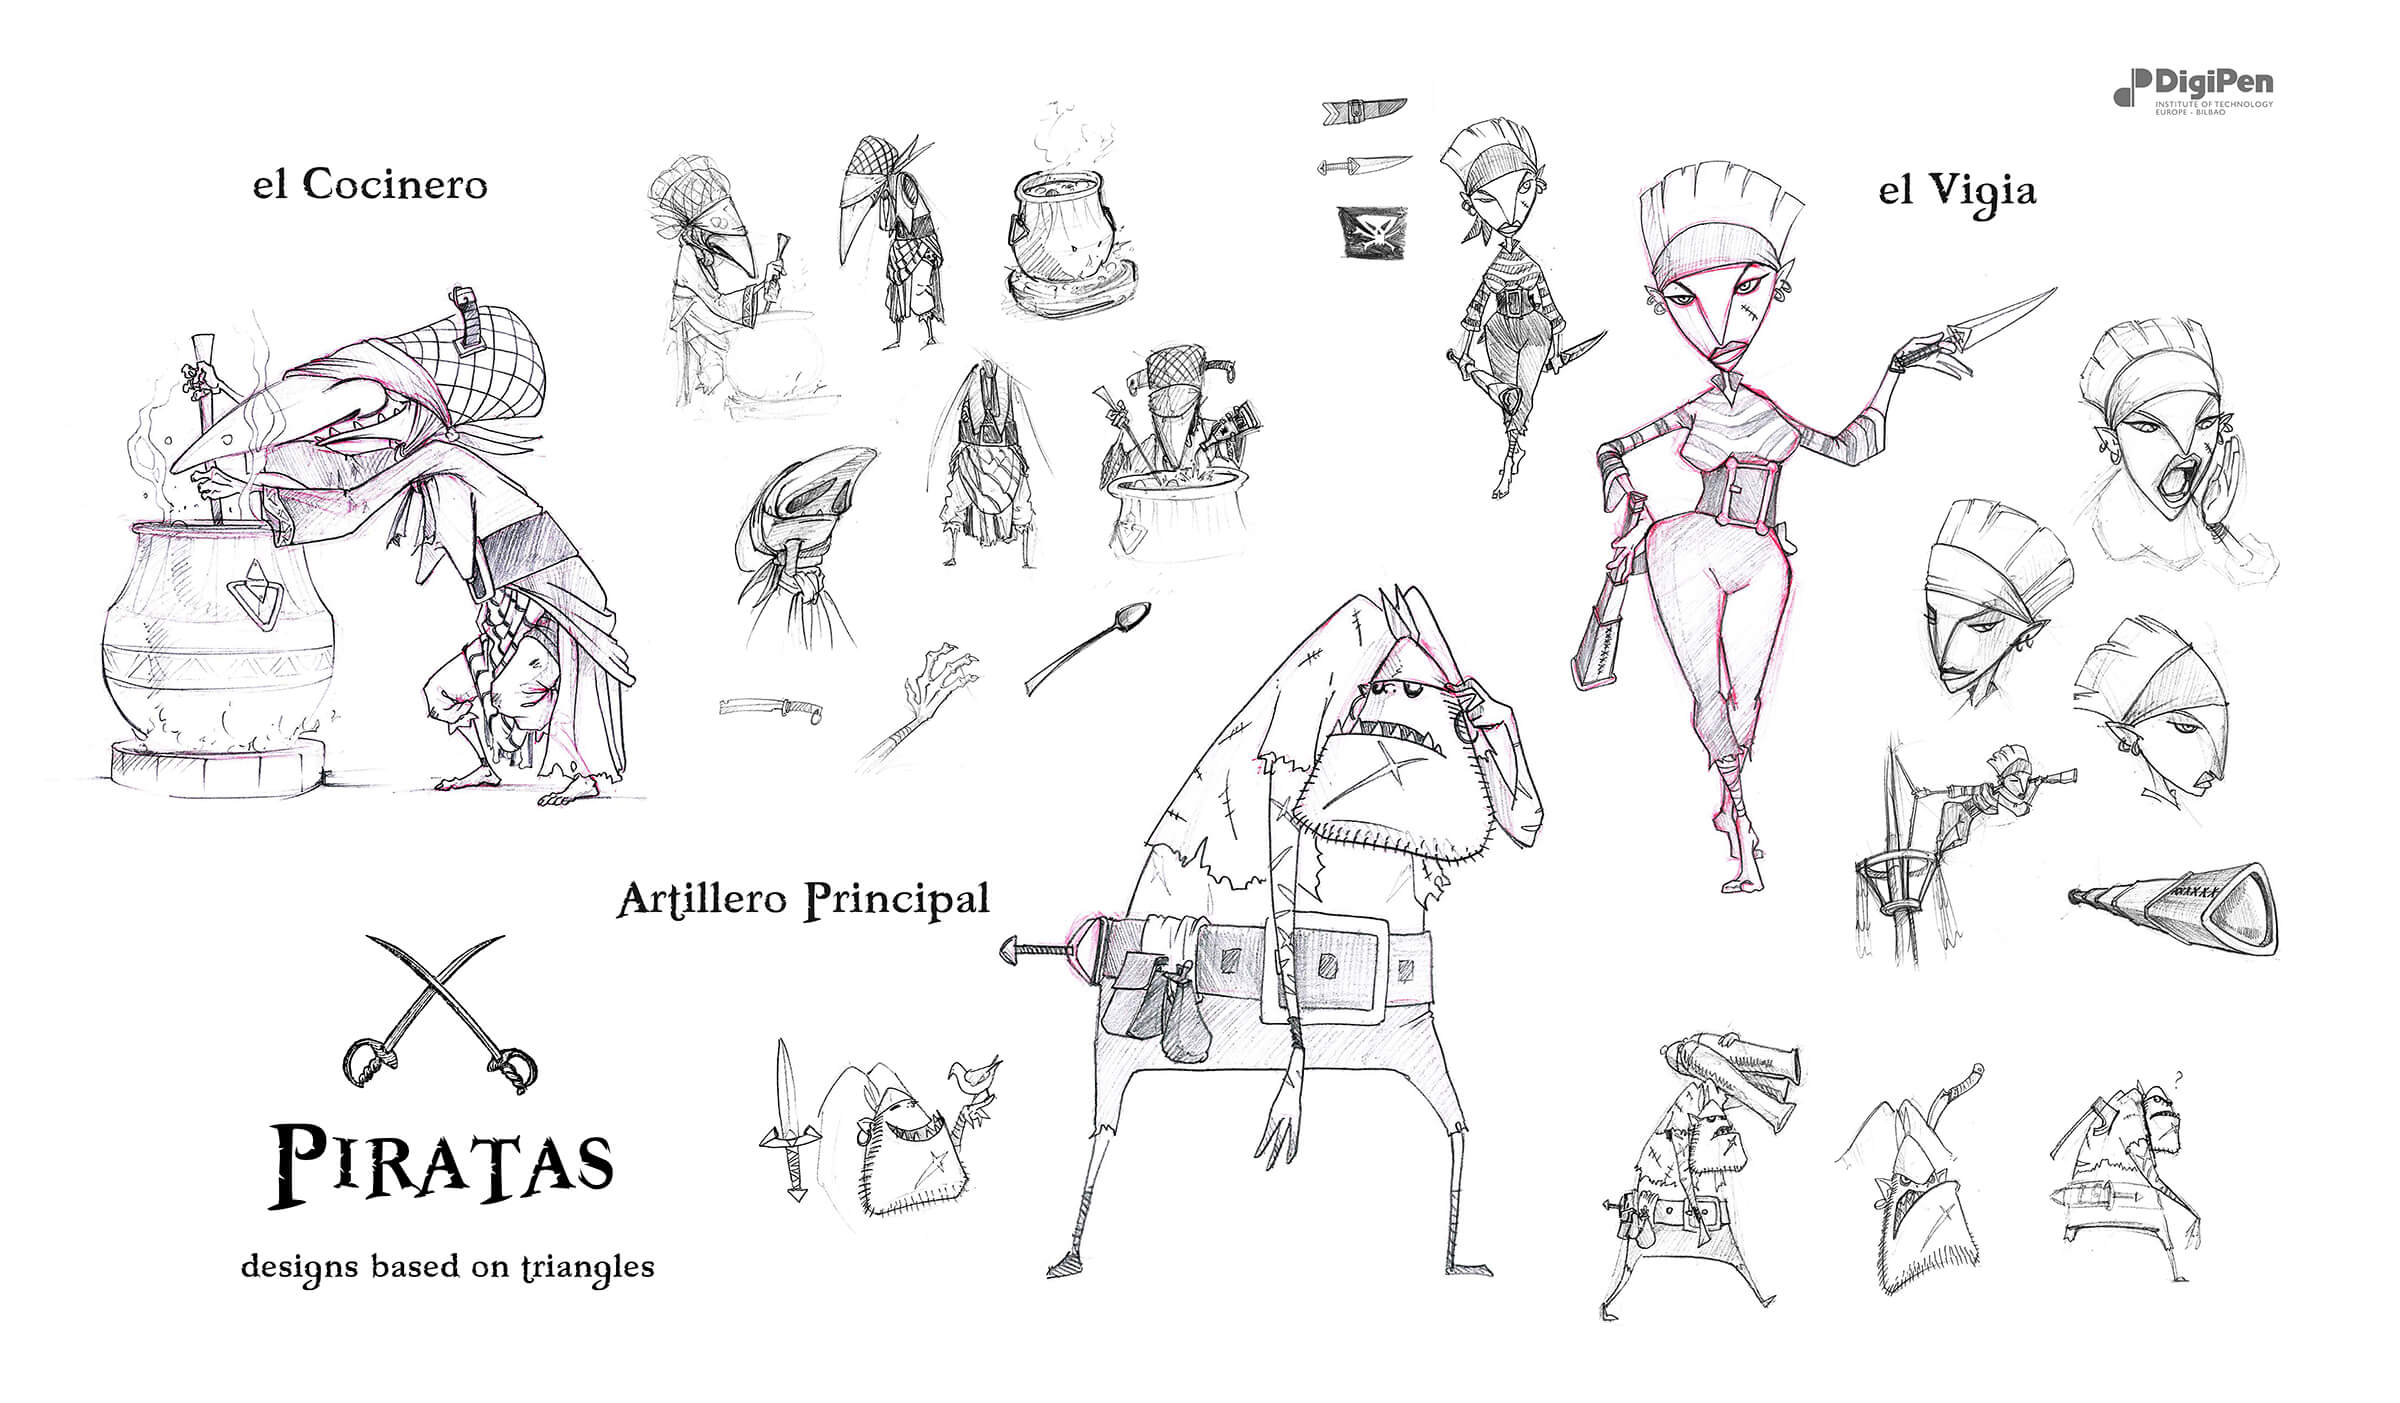 Stylized black-and-white sketches of an old cook, an angular watchwoman, and a clumsy pirate artilleryman.